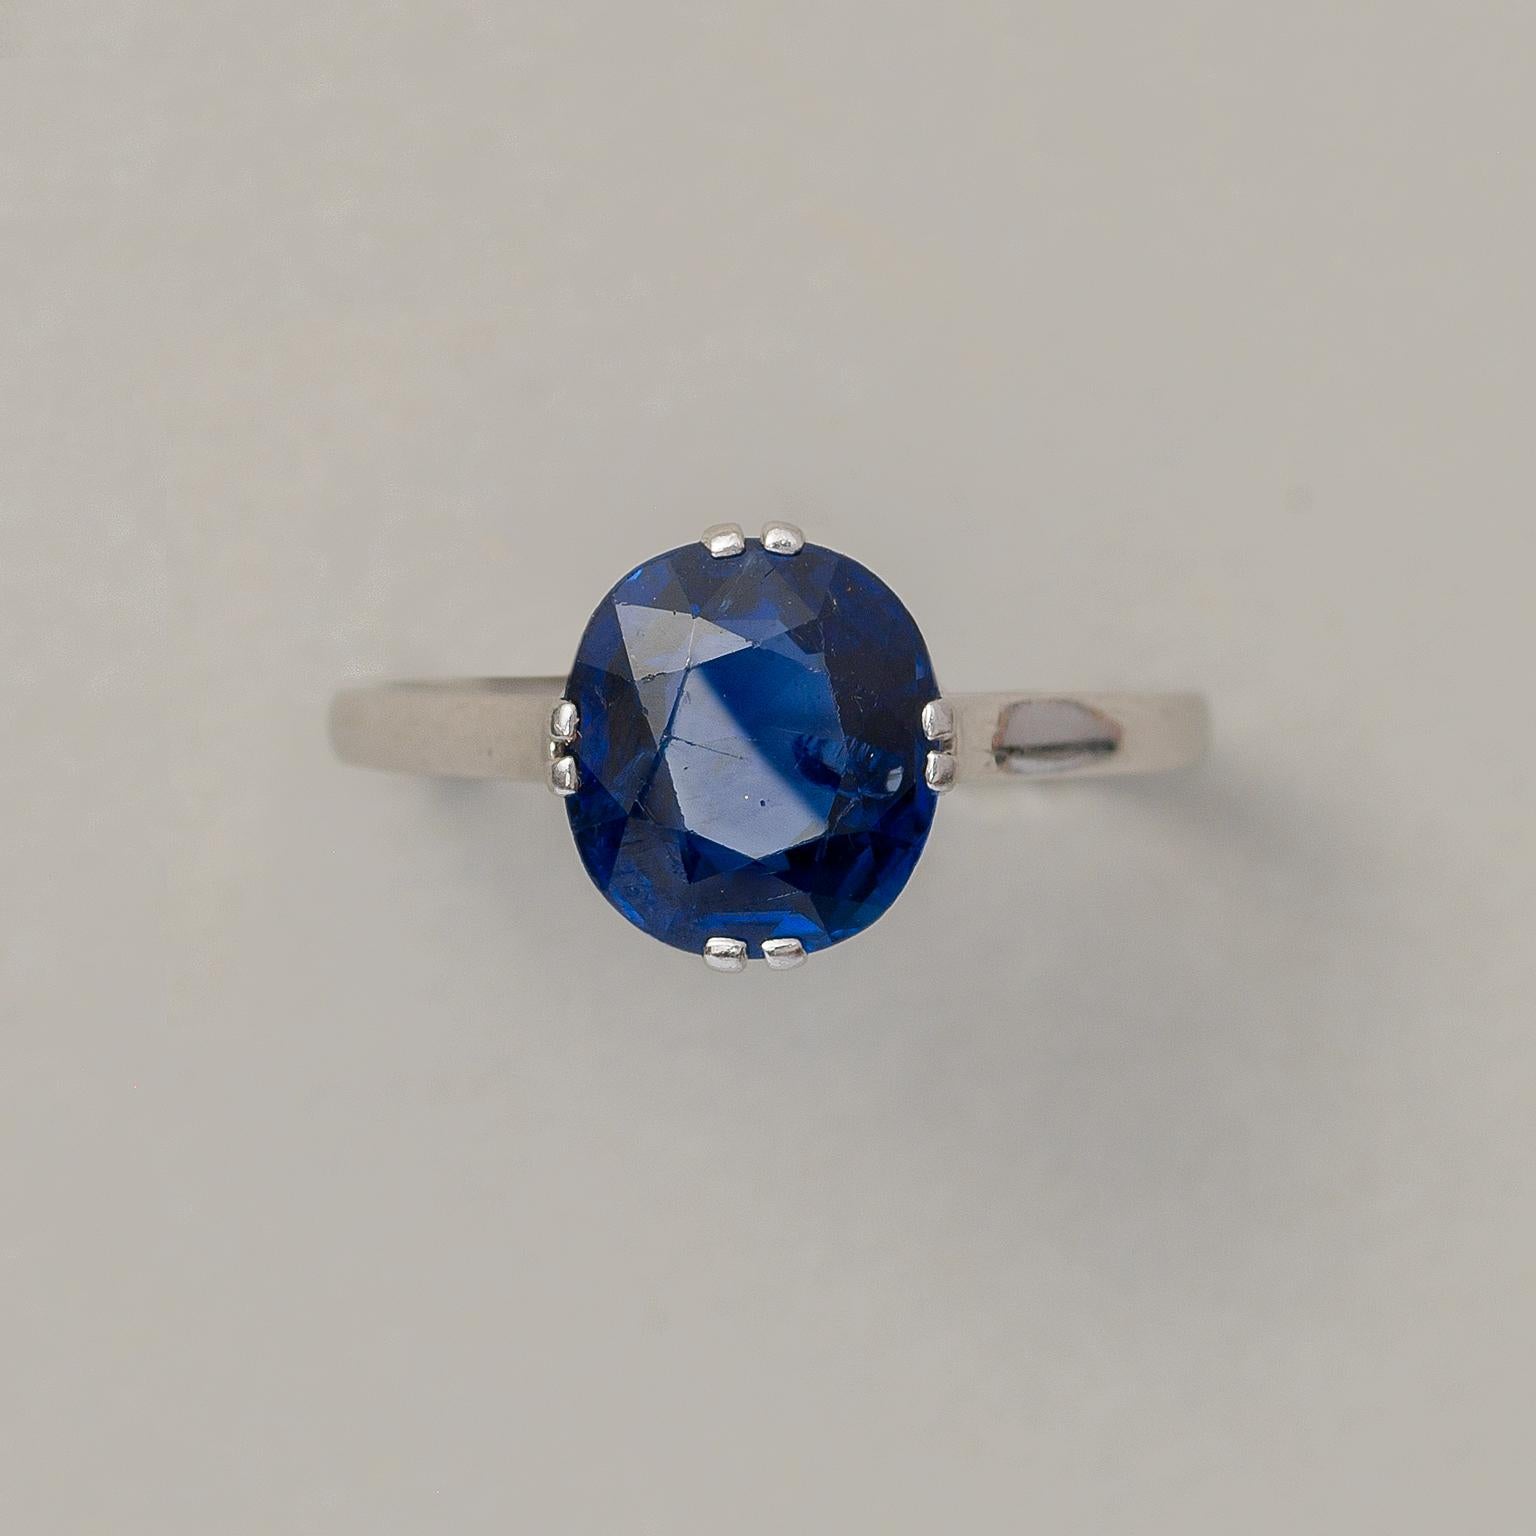 A platinum ring with a deep blue cushion cut natural untreated Burma sapphire (approx. 2.85 carat and 9.3 x 8.3 x 4.1 mm) set in a double prong setting, France, circa 1920.

weight: 3.14 grams
ring size: 18 mm / 8 US